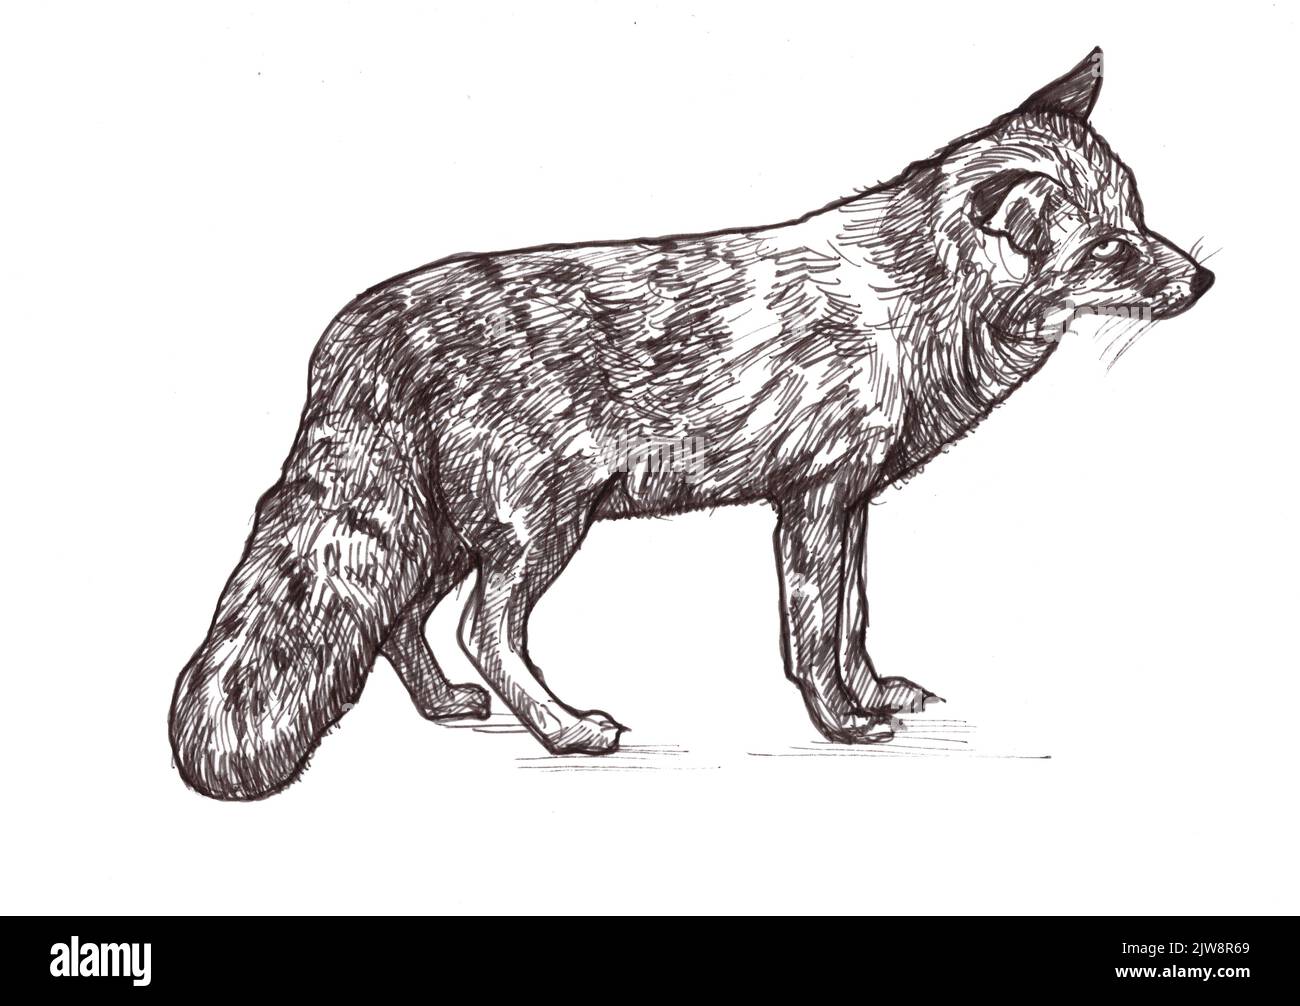 Black and white illustration of a red fox on a white background. Stock Photo